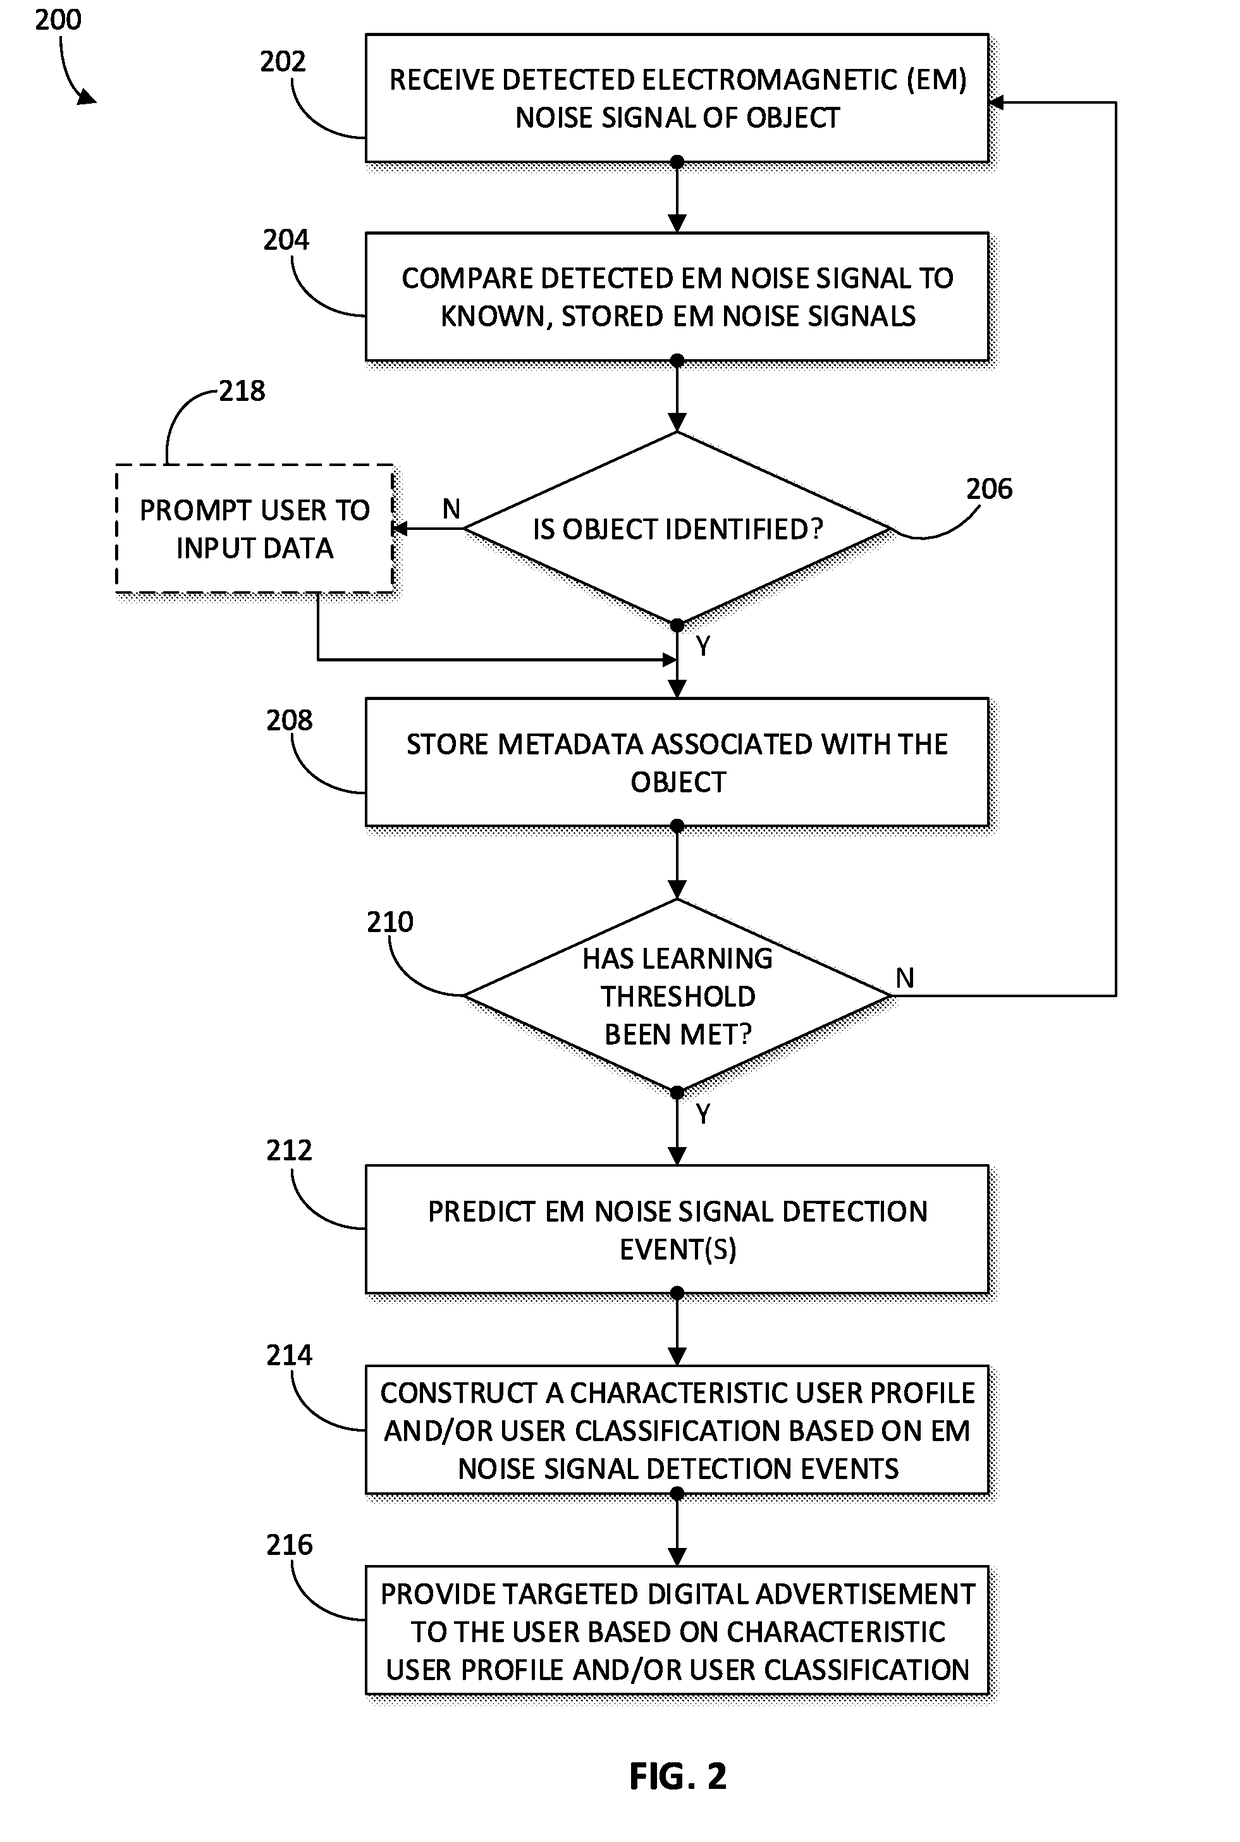 System and method for using electromagnetic noise signal-based predictive analytics for digital advertising